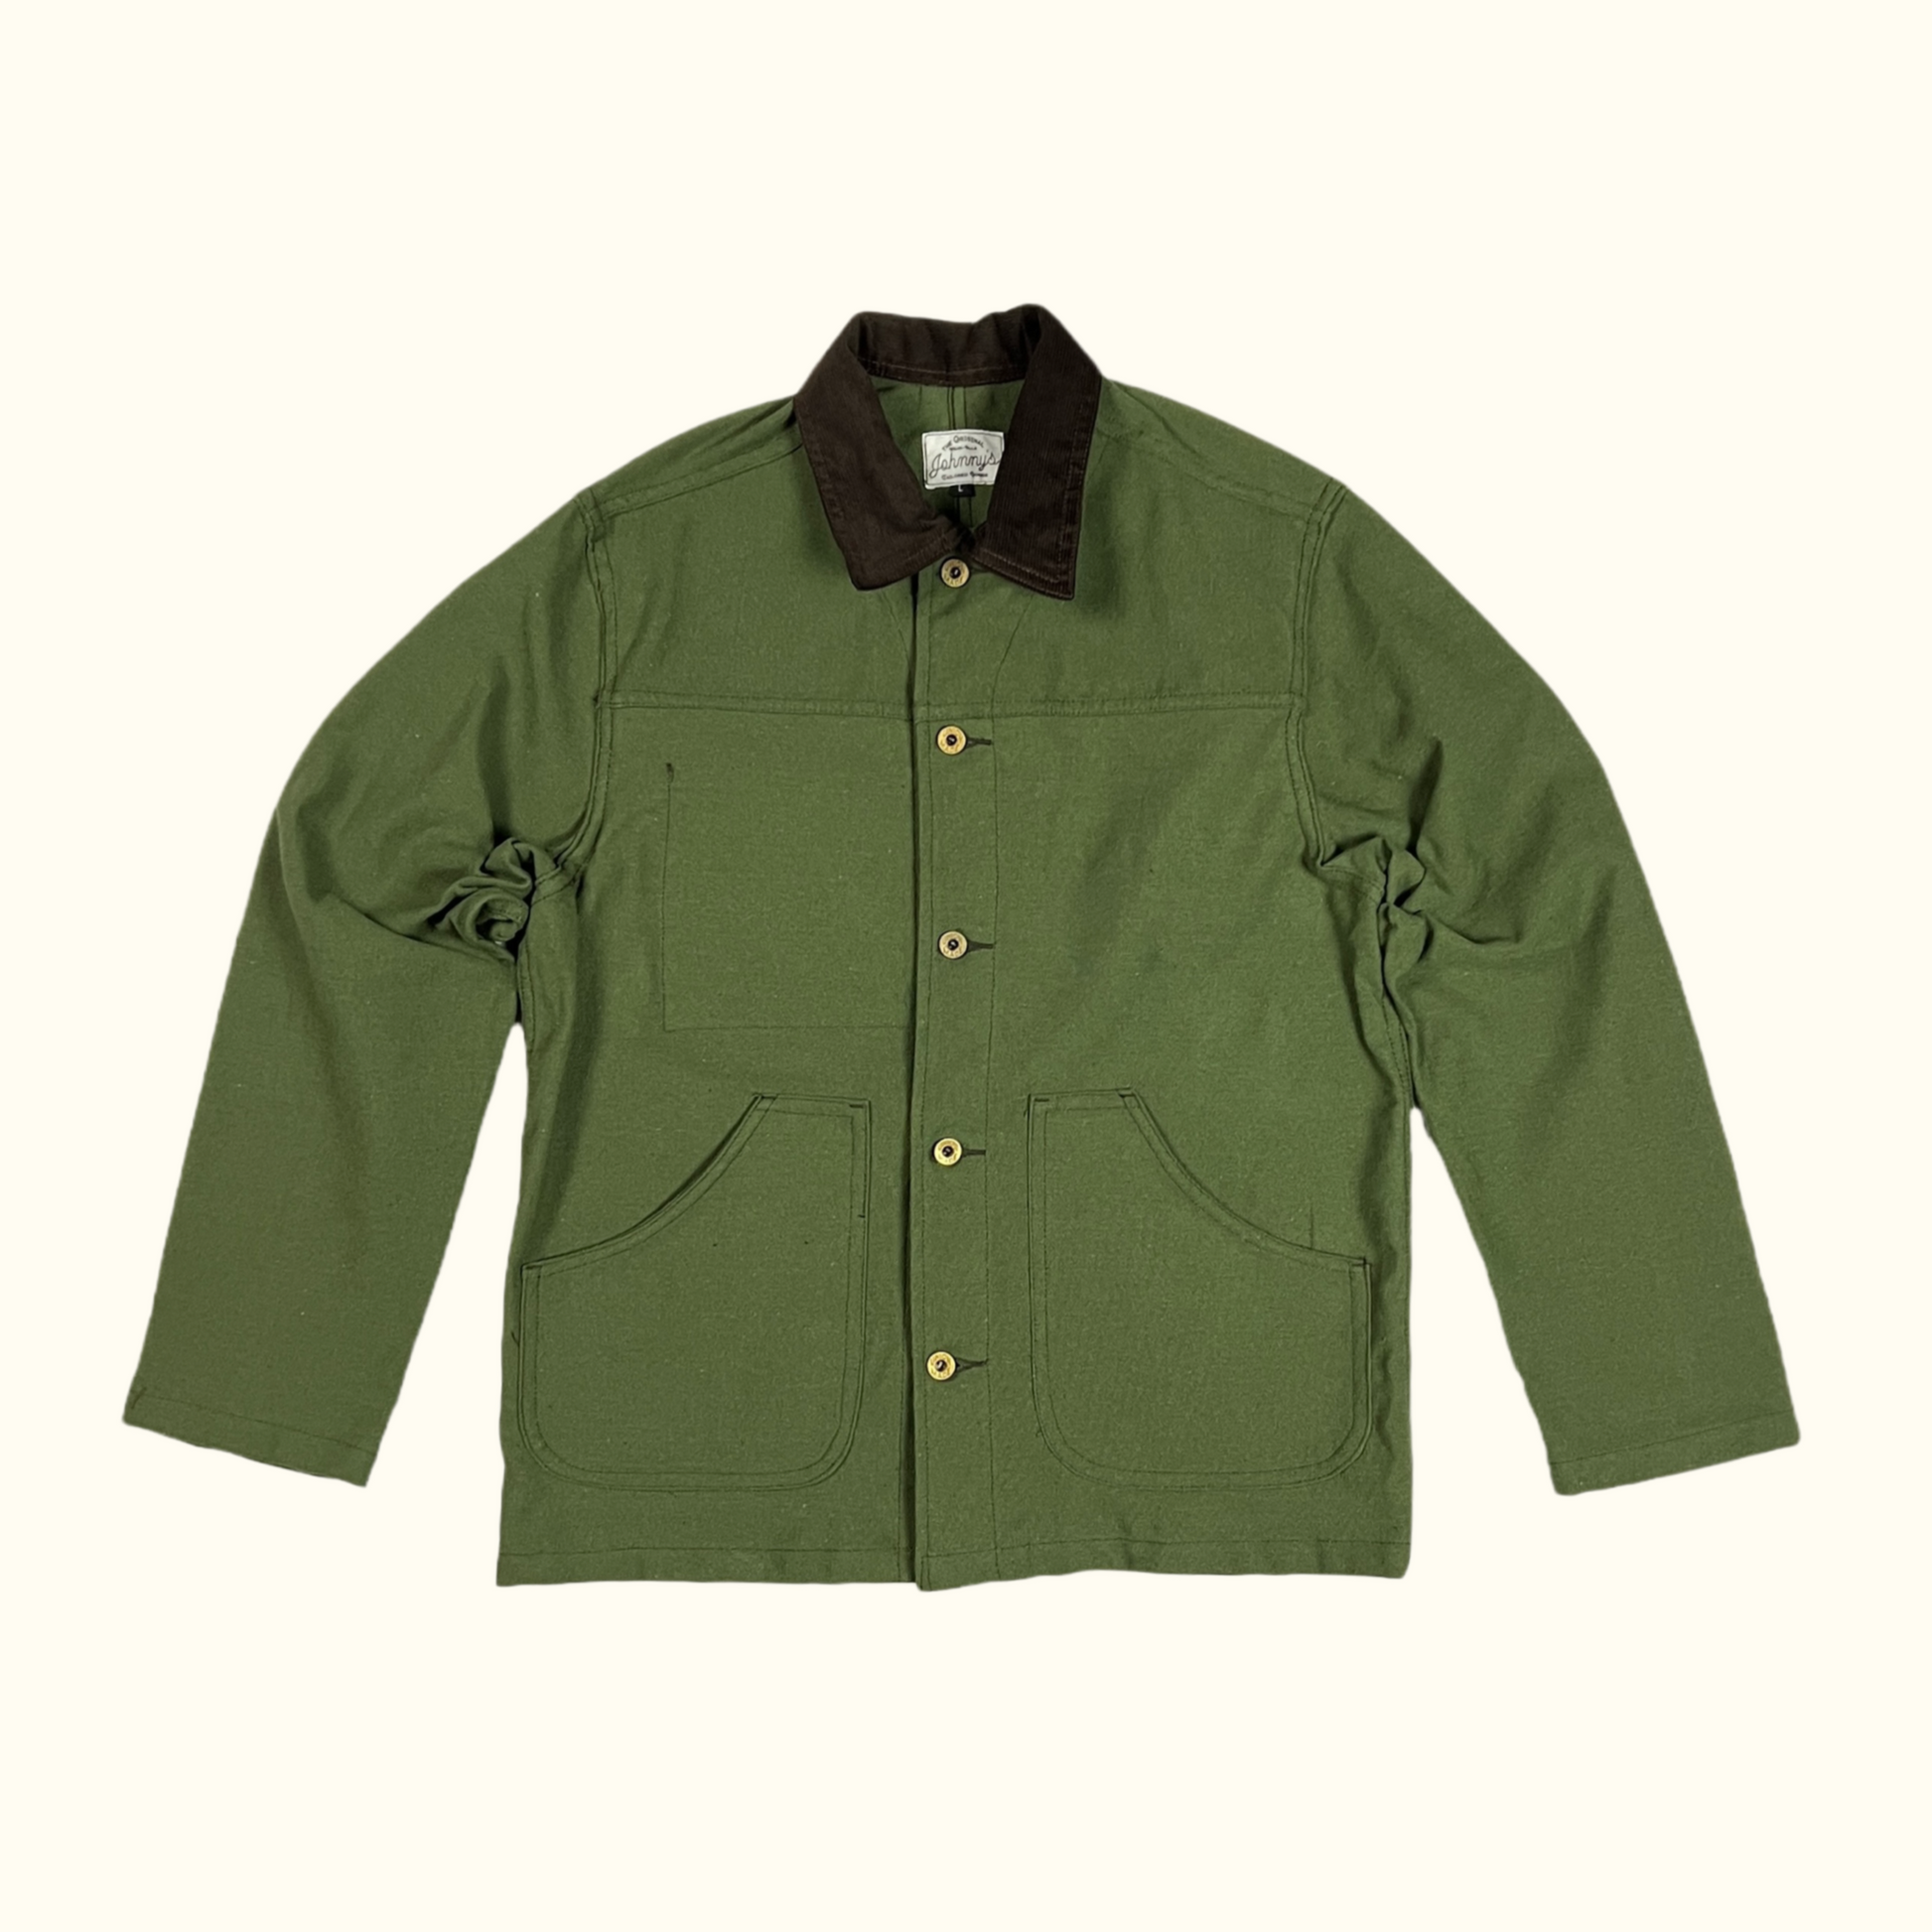 Cord Collar Canvas Work Jacket - Olive Green/Brown